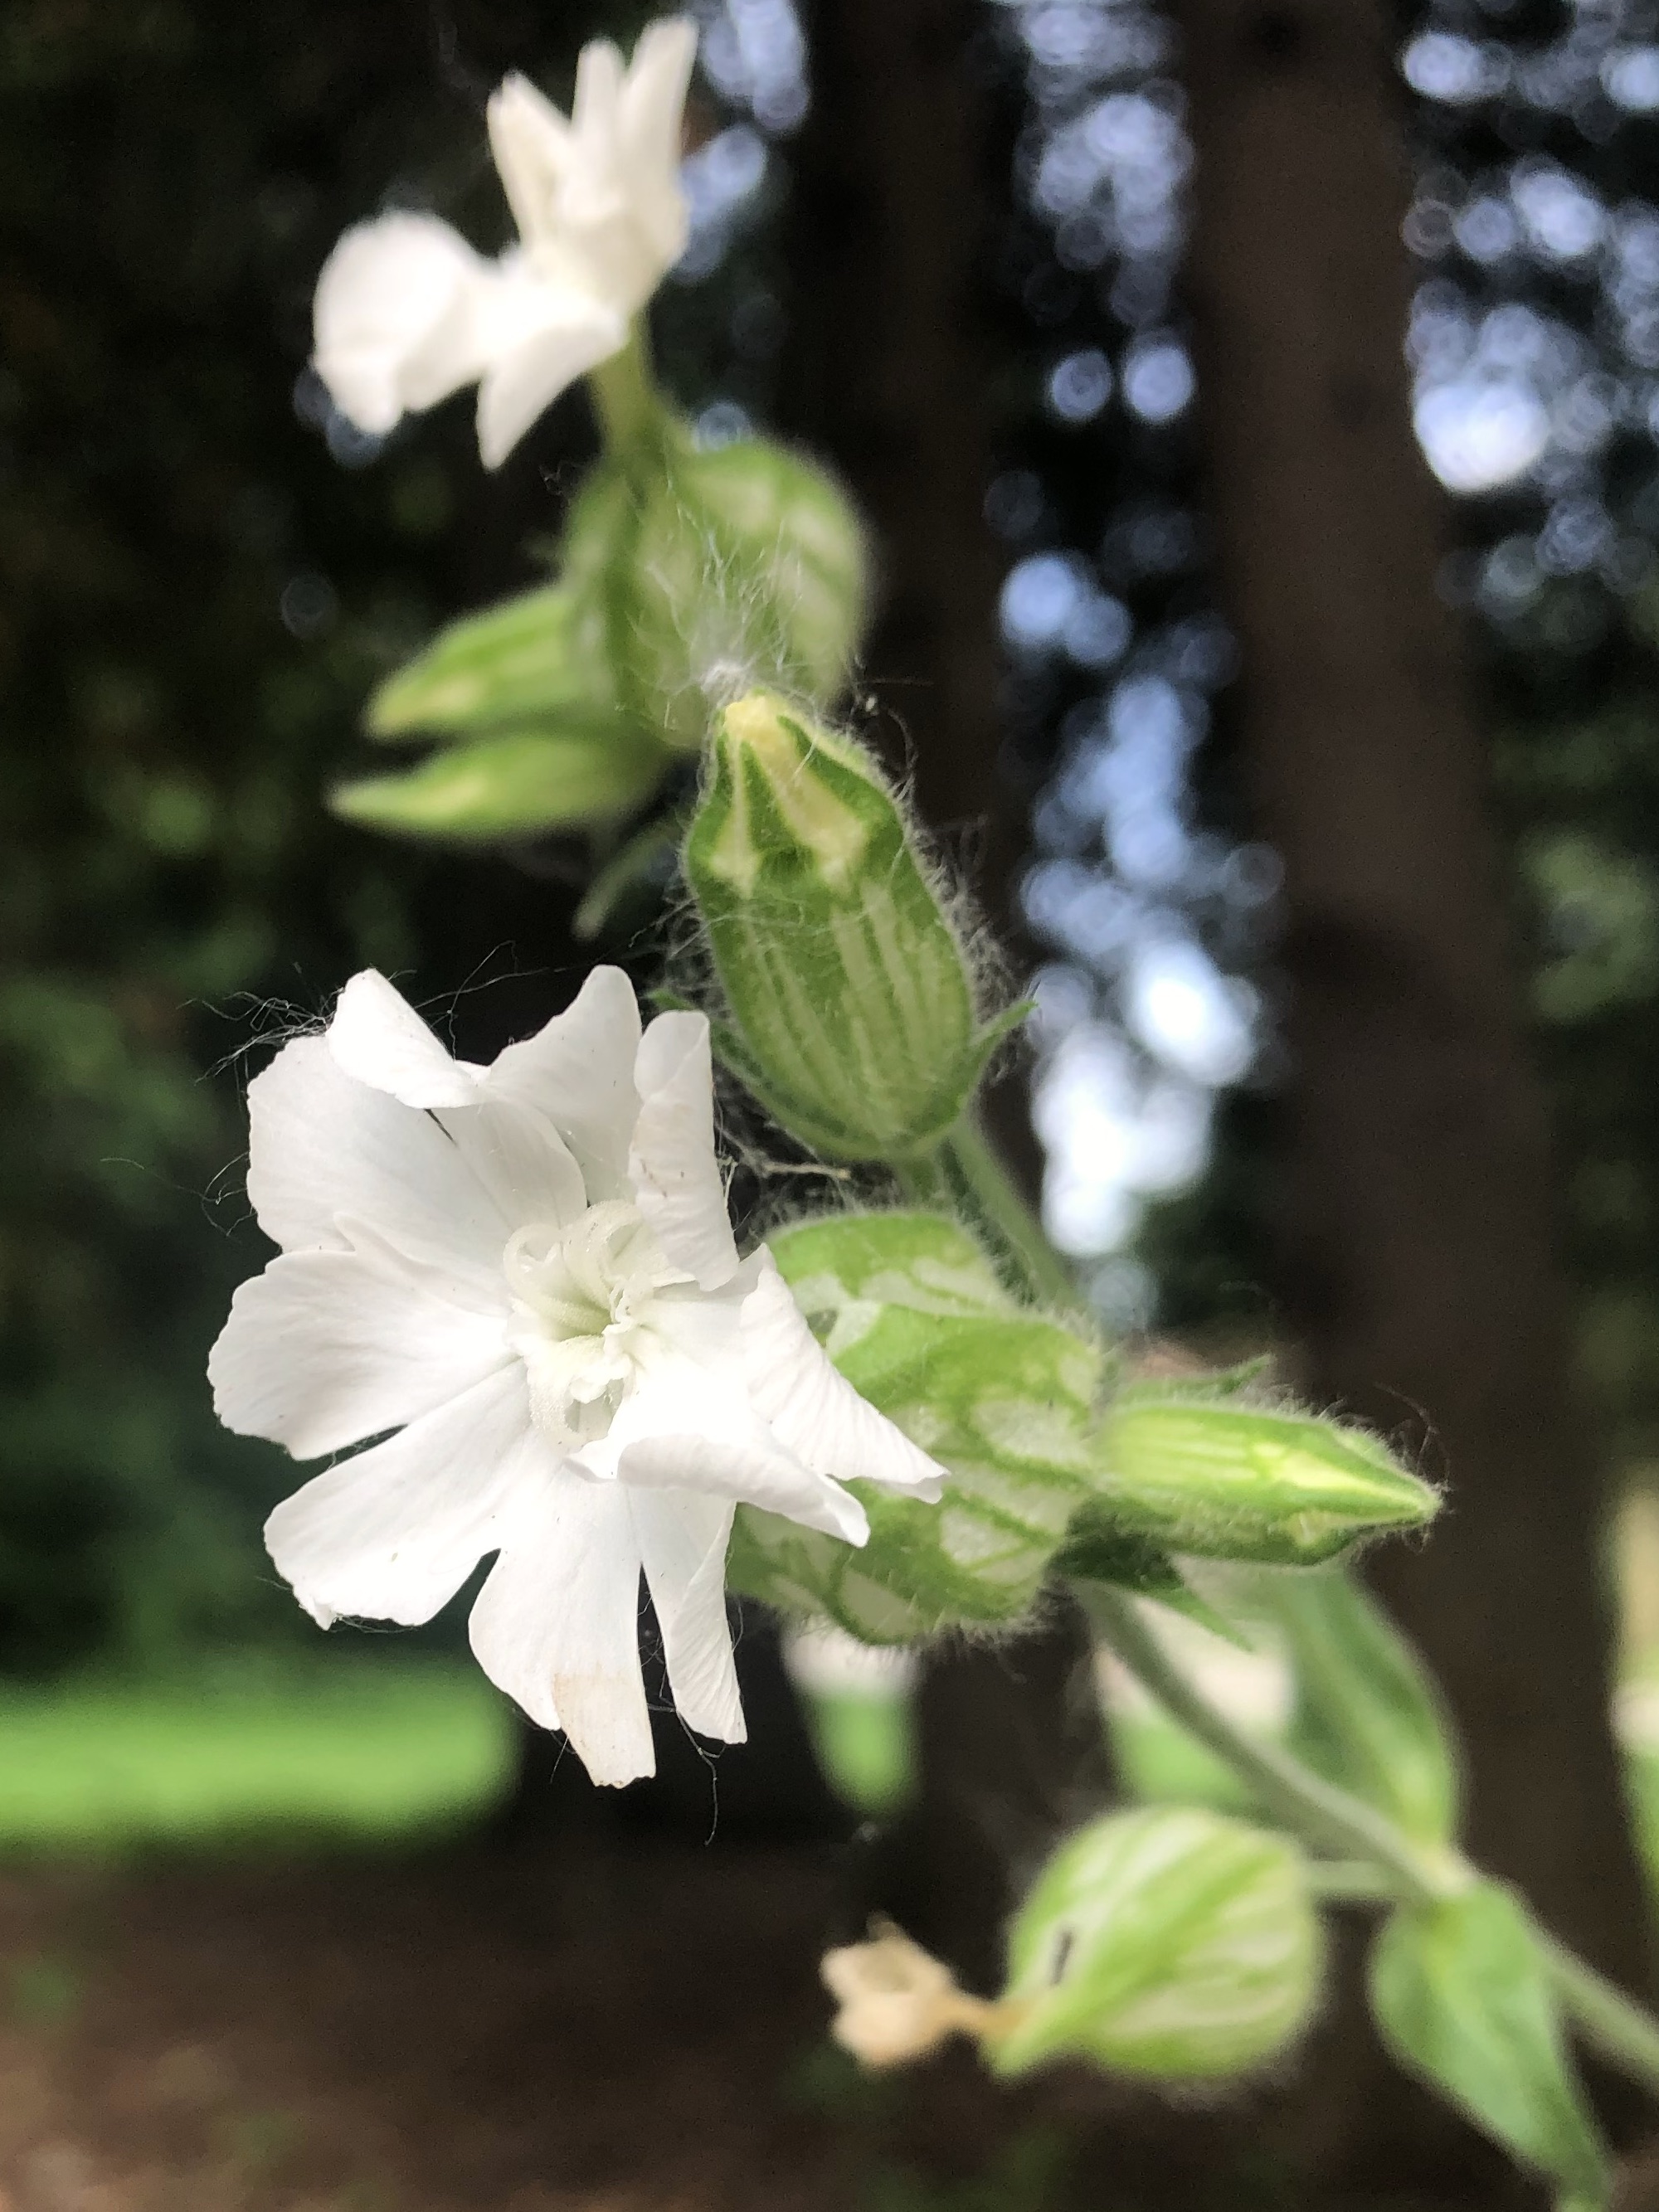 White Campion near Wingra Park parking lot in Madison, Wisconsin on June 15, 2022.